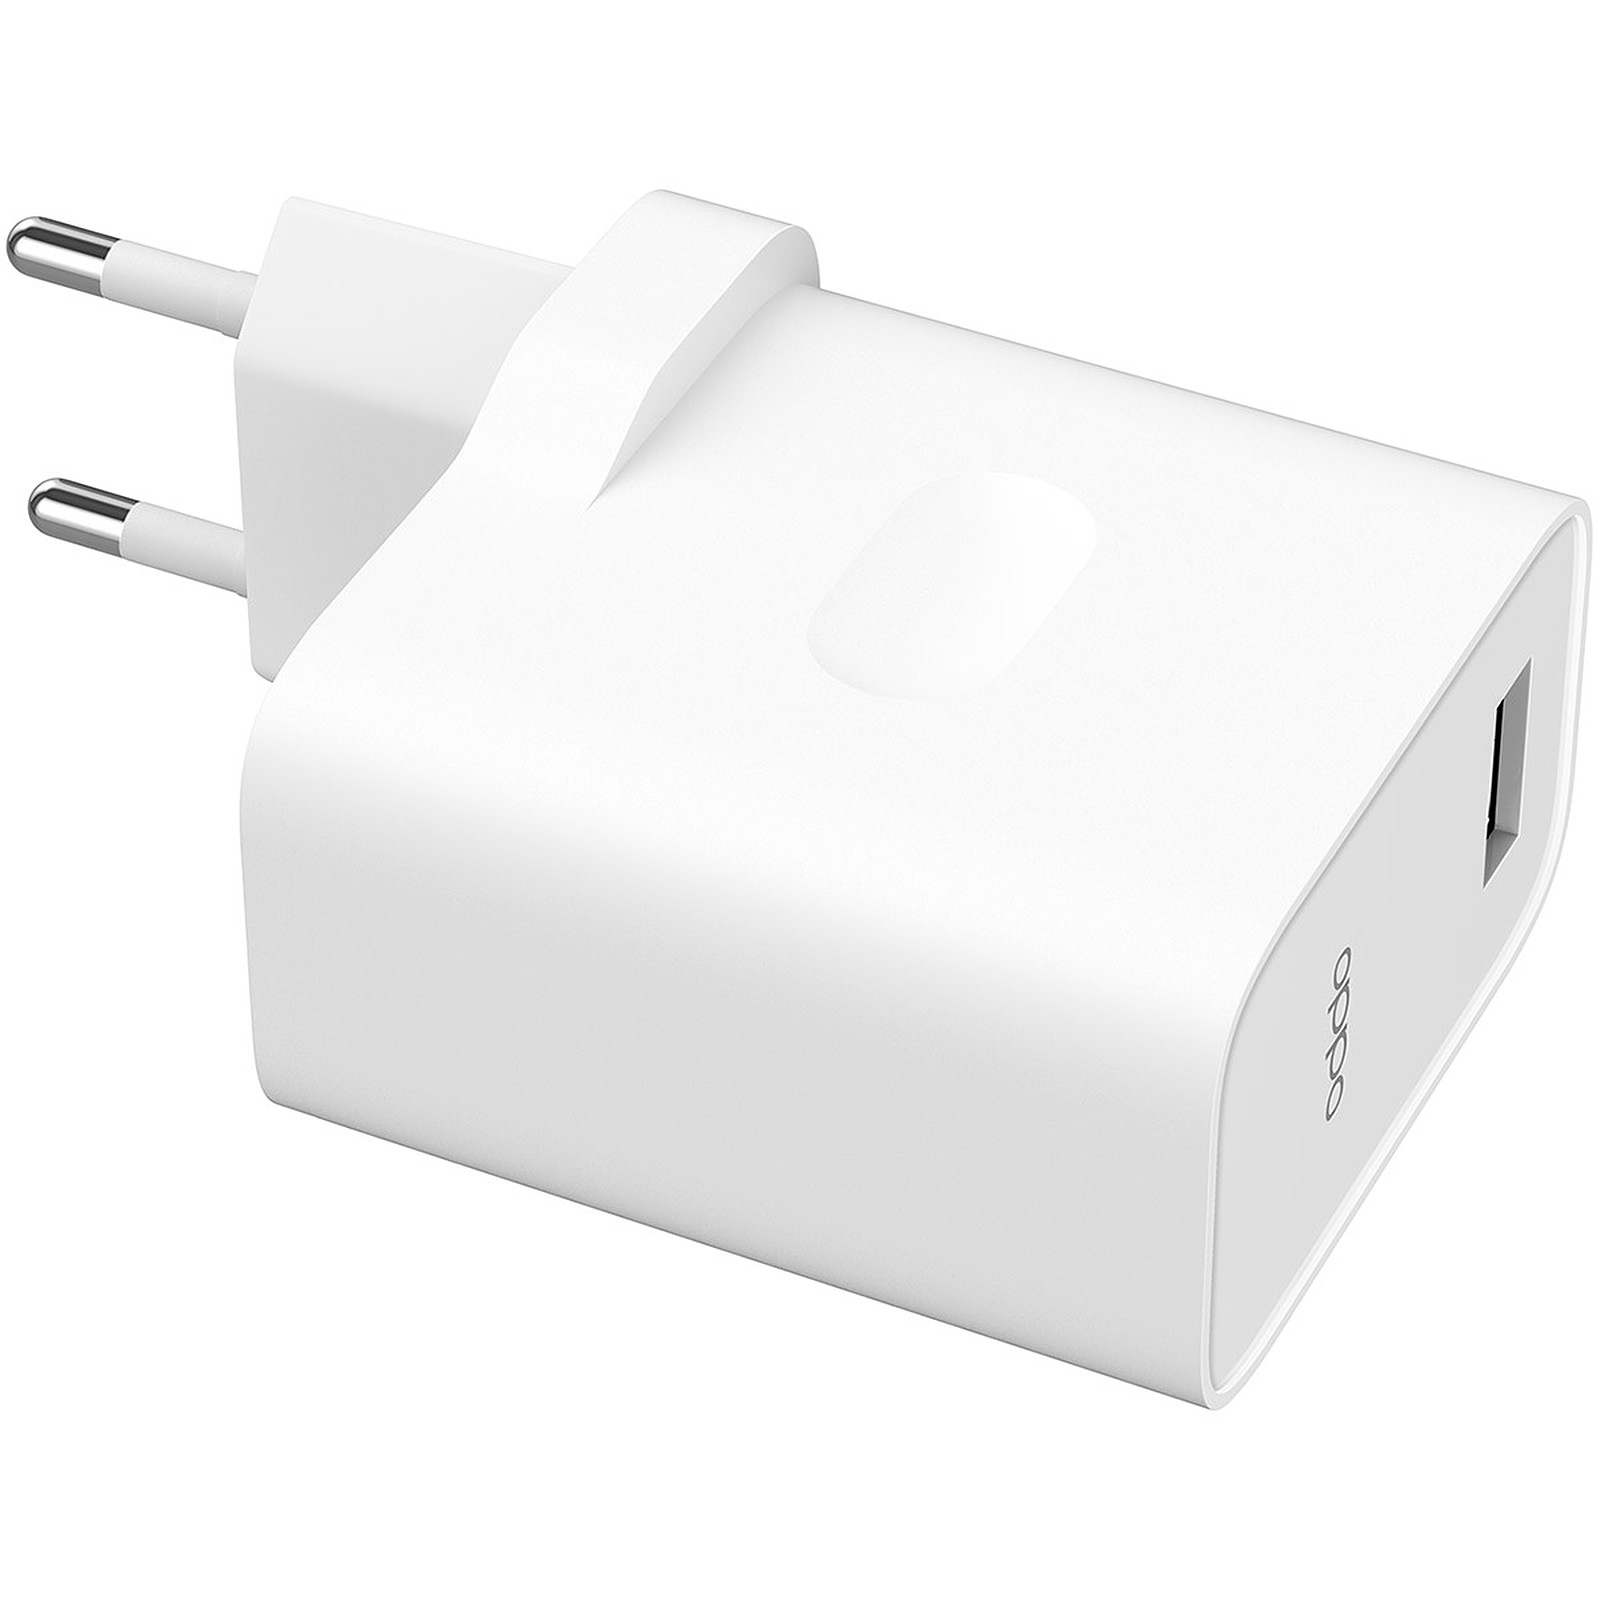 OPPO Chargeur Maison VOOC 4.0 30W Blanc - USB OPPO